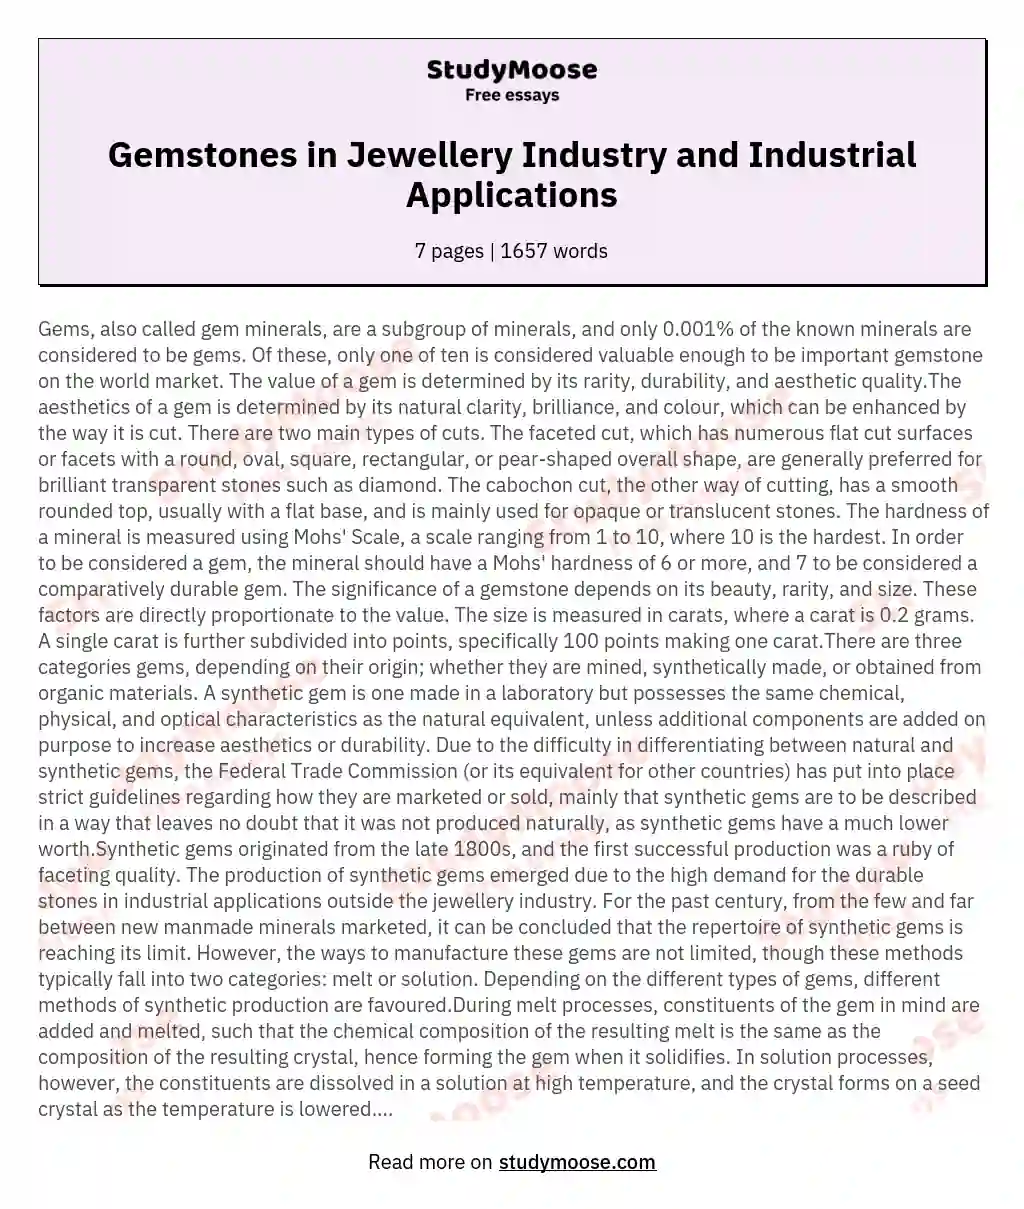 Gemstones in Jewellery Industry and Industrial Applications